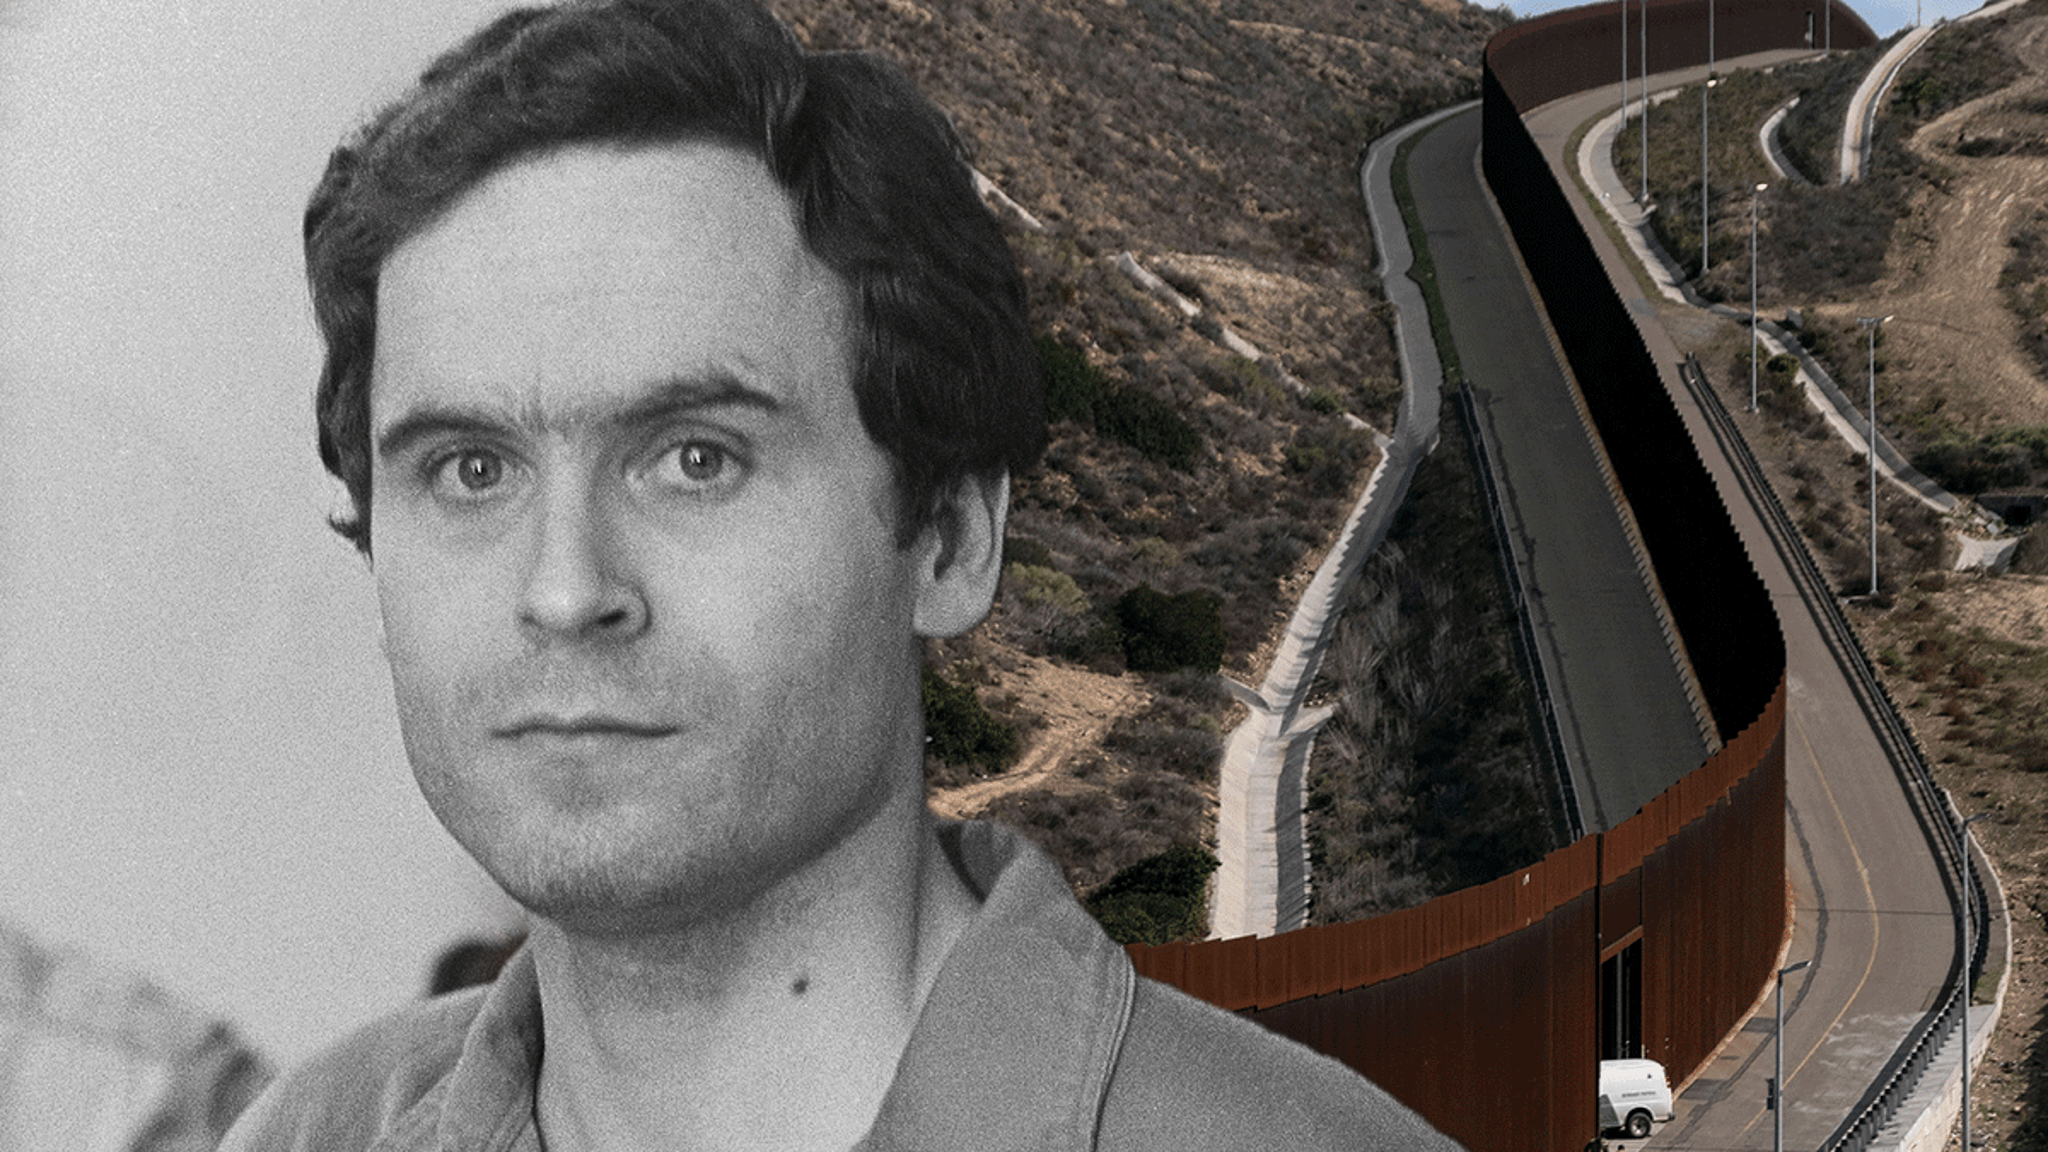 Mexico has serial killer similar to Ted Bundy on the loose, prosecutor says